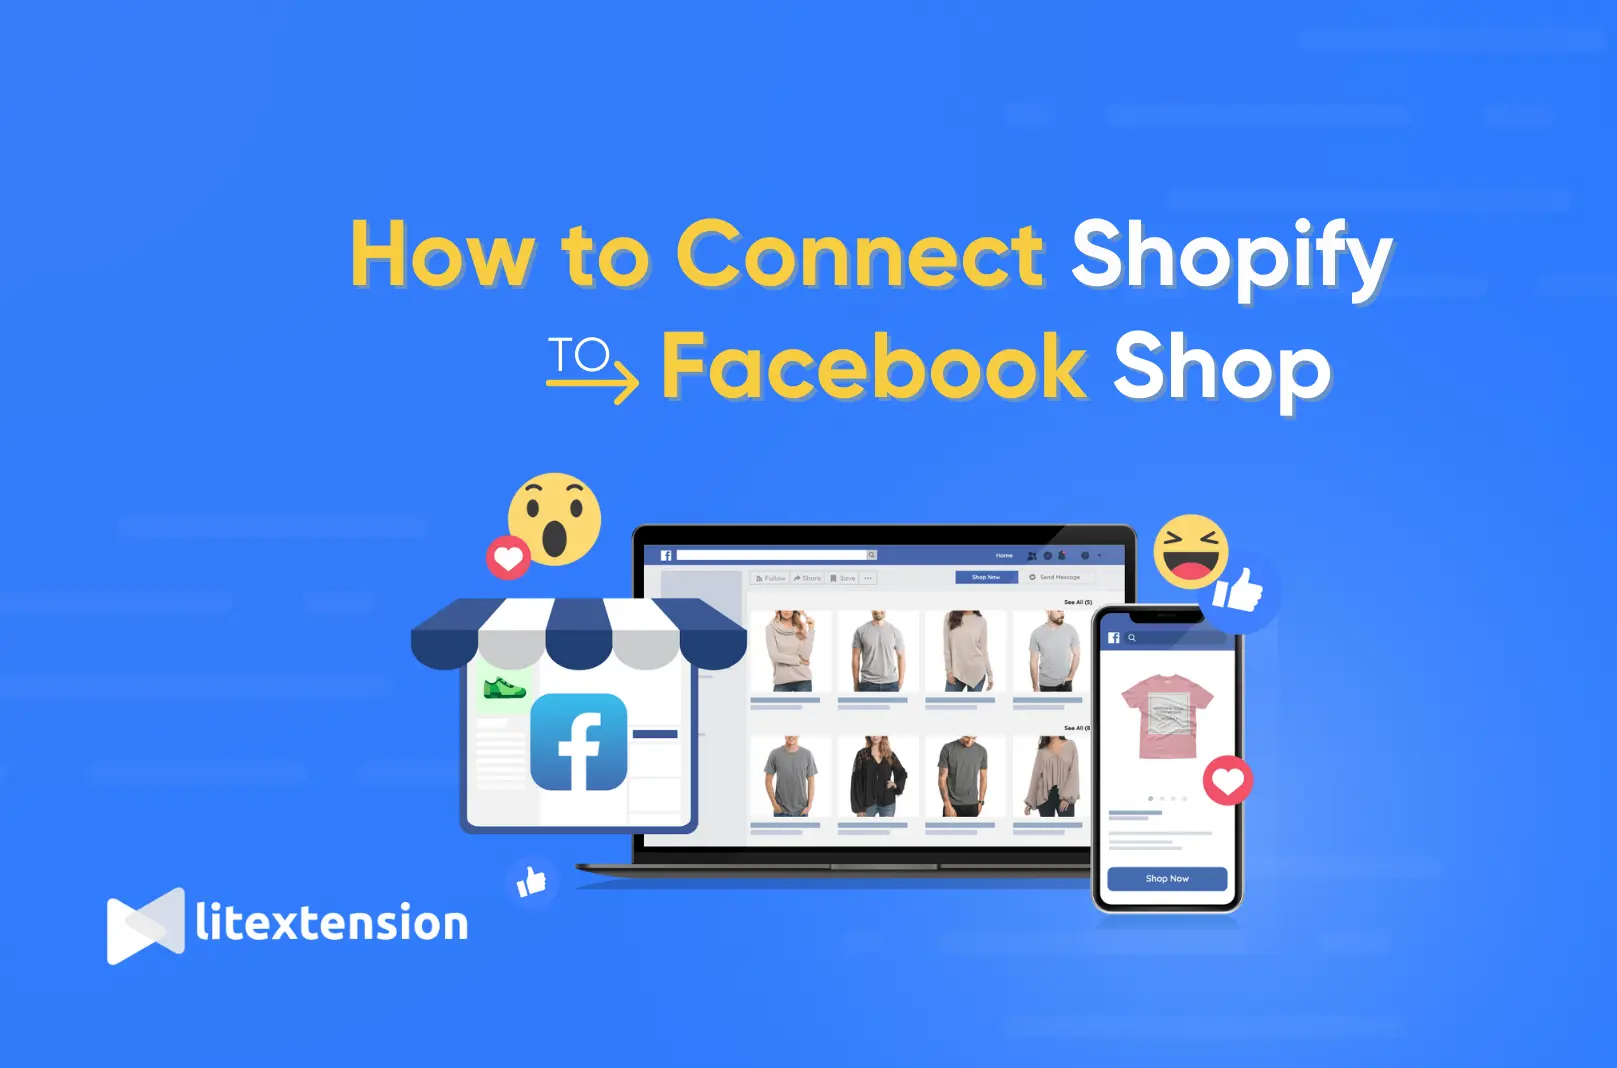 How to connect to Shopify